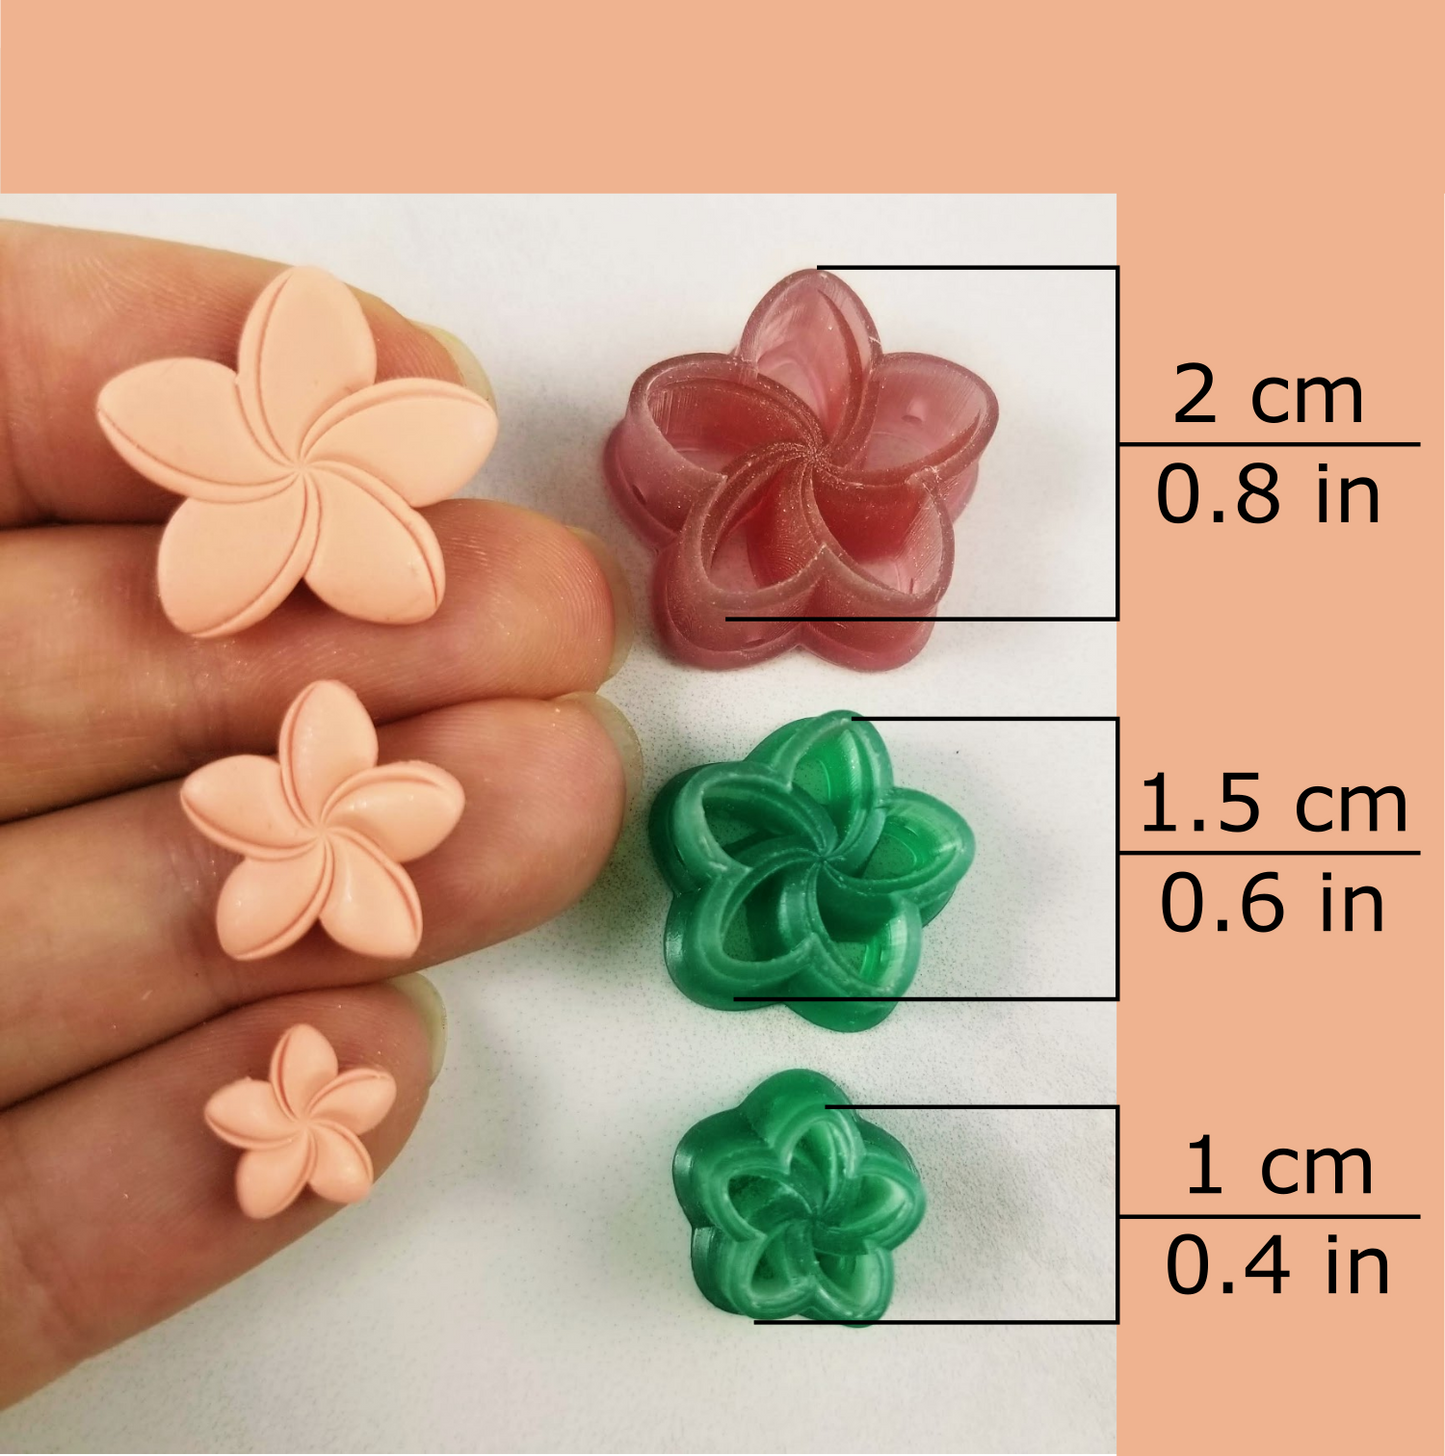 Plumeria polymer clay cutter available sizes, 2 centimeters / 0.8 inches, 1.5 centimeters / 0.6 inches, 0.5 centimeter / 0.2 inches